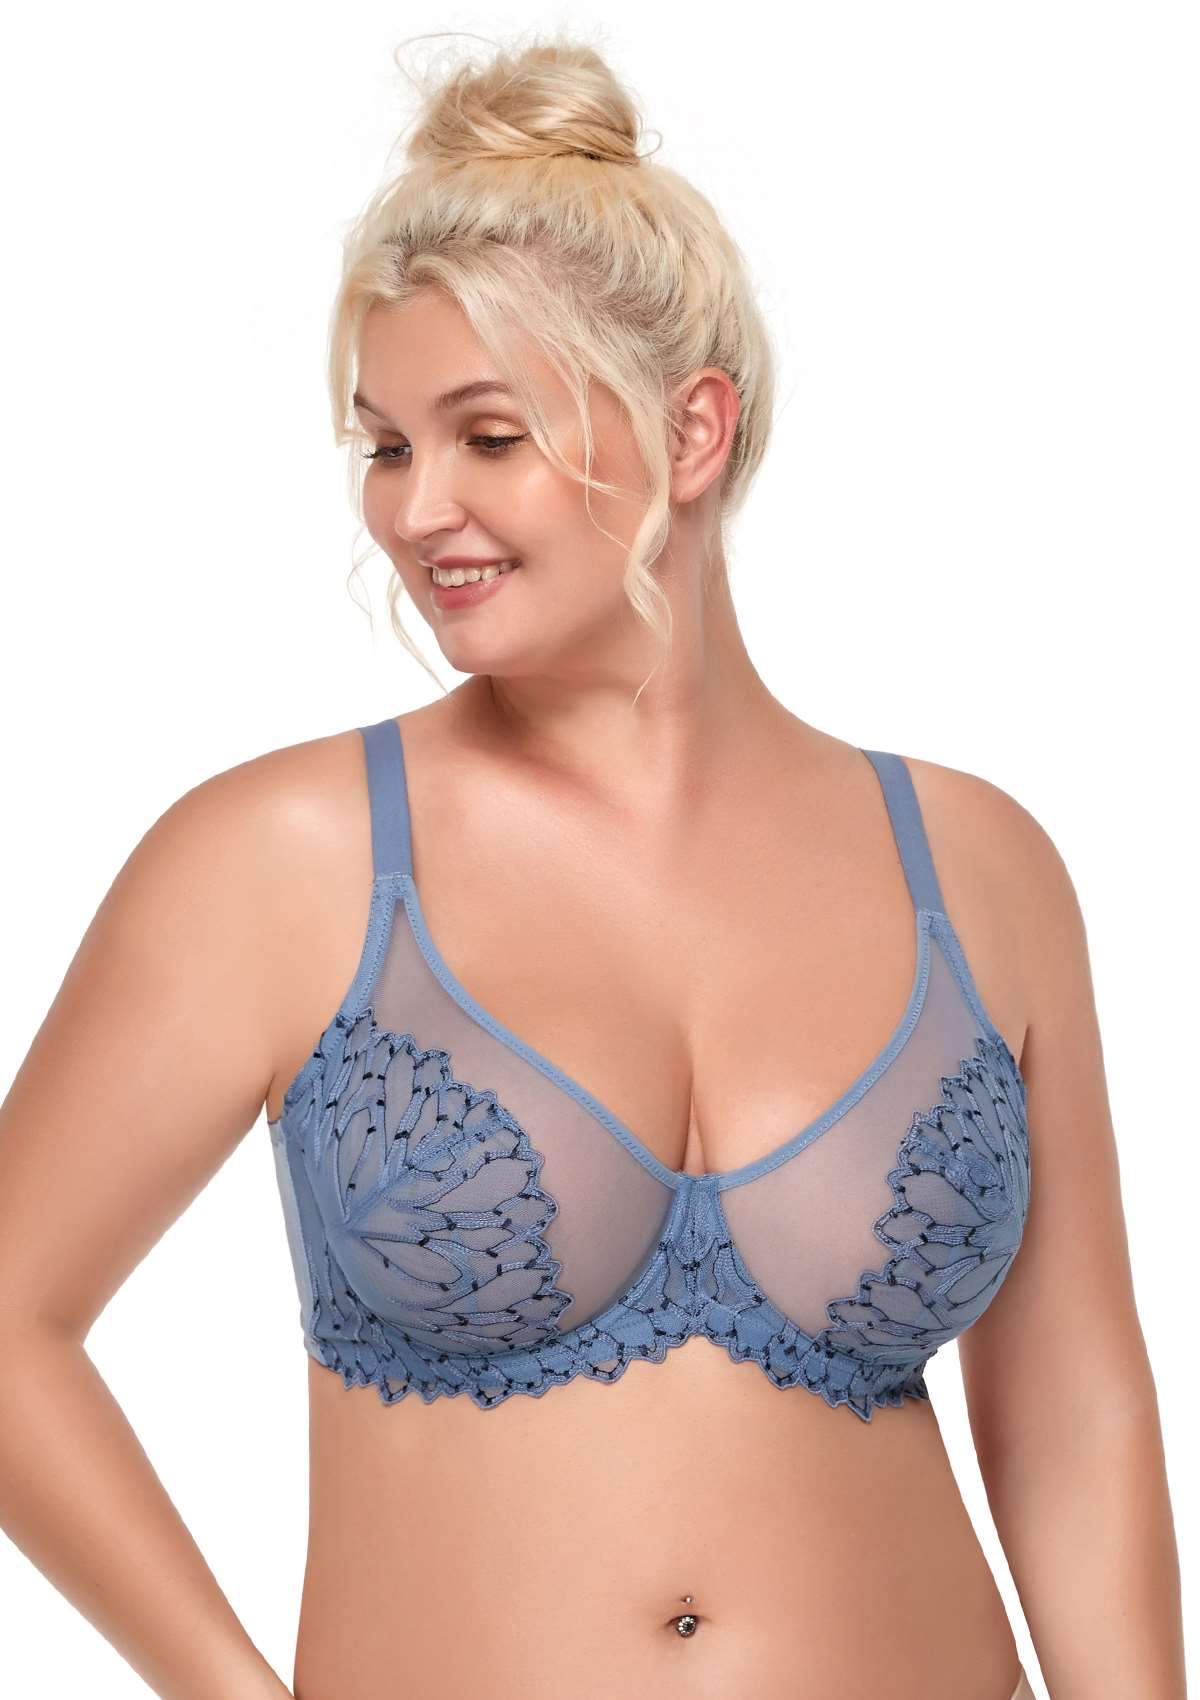 HSIA Chrysanthemum Plus Size Lace Bra: Back Support Bra For Posture - Blue / 34 / C